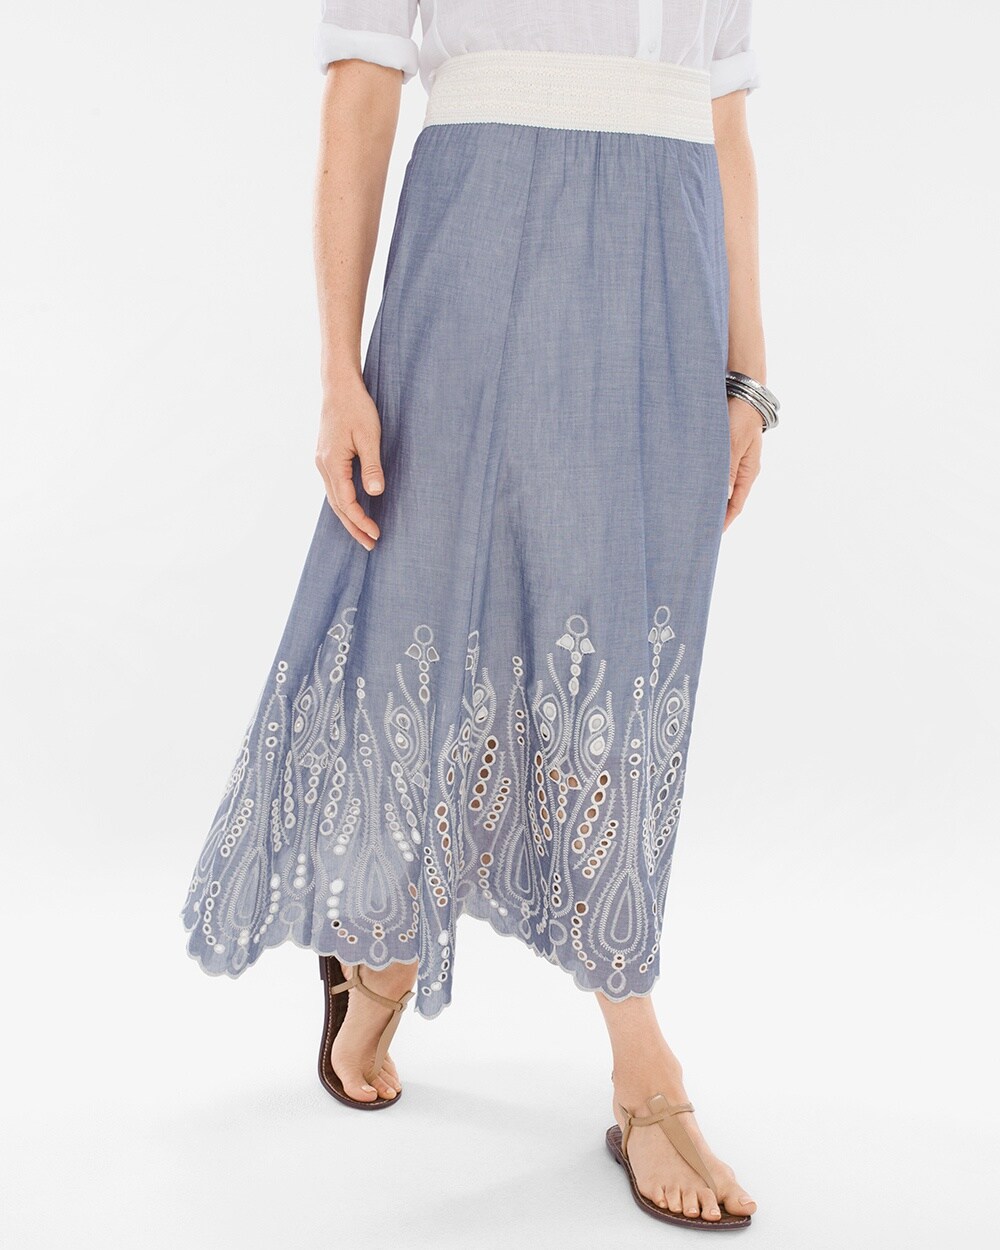 Embroidered Lace Midi Skirt